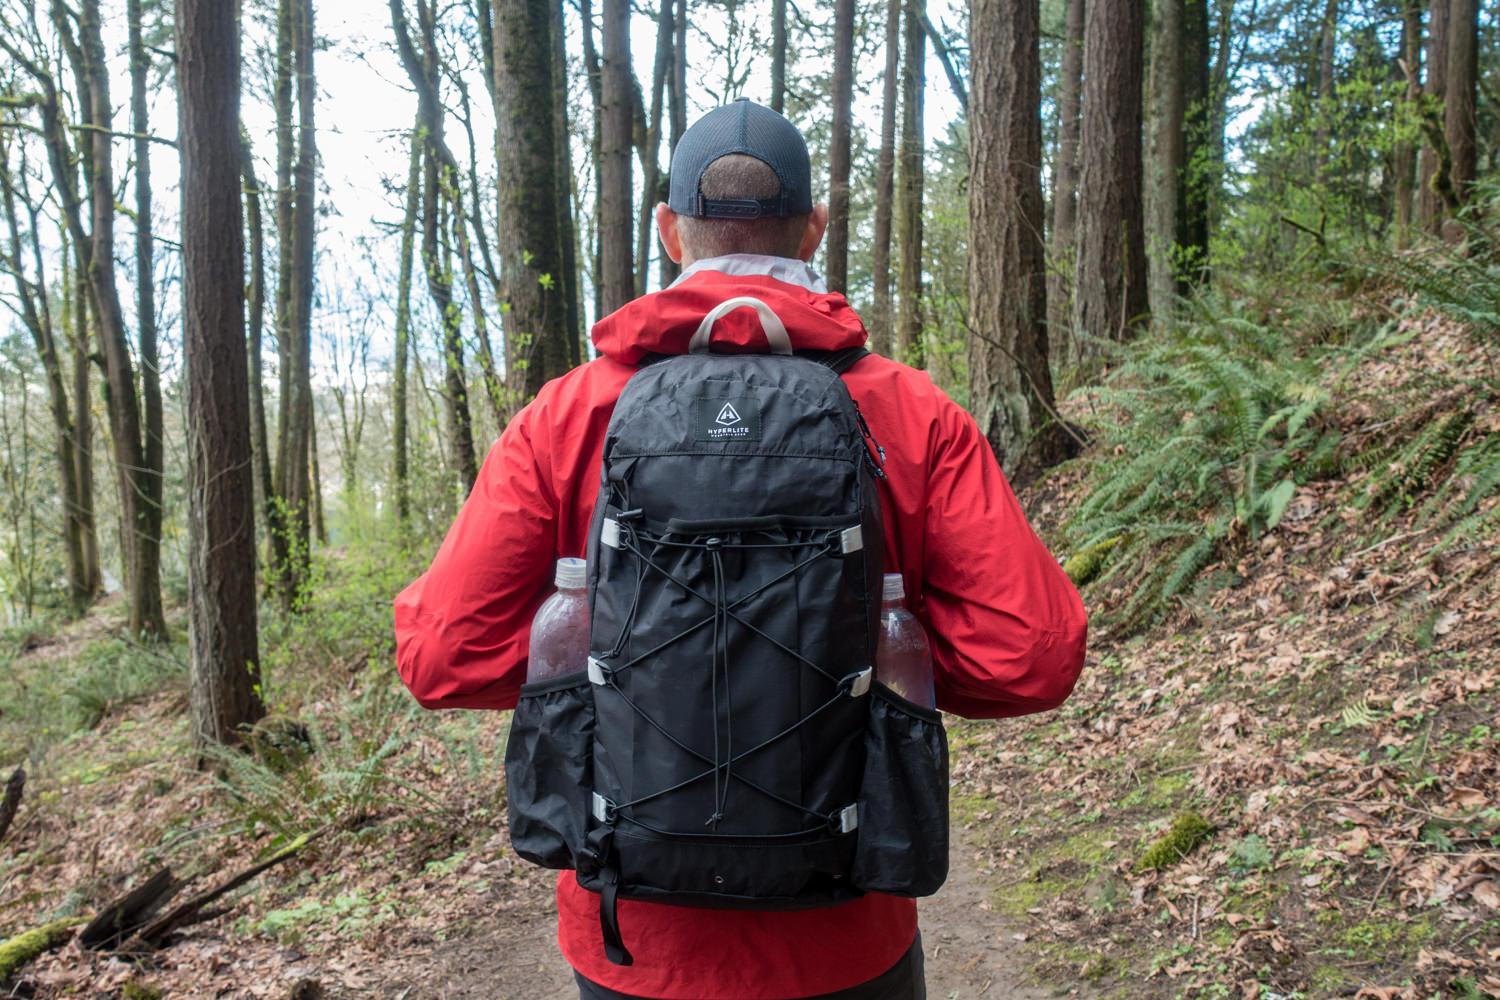 A hiker in a red jacket wearing the Hyperlite Mountain Gear Daybreak on a forest trail with two Smartwater bottles in the side pockets